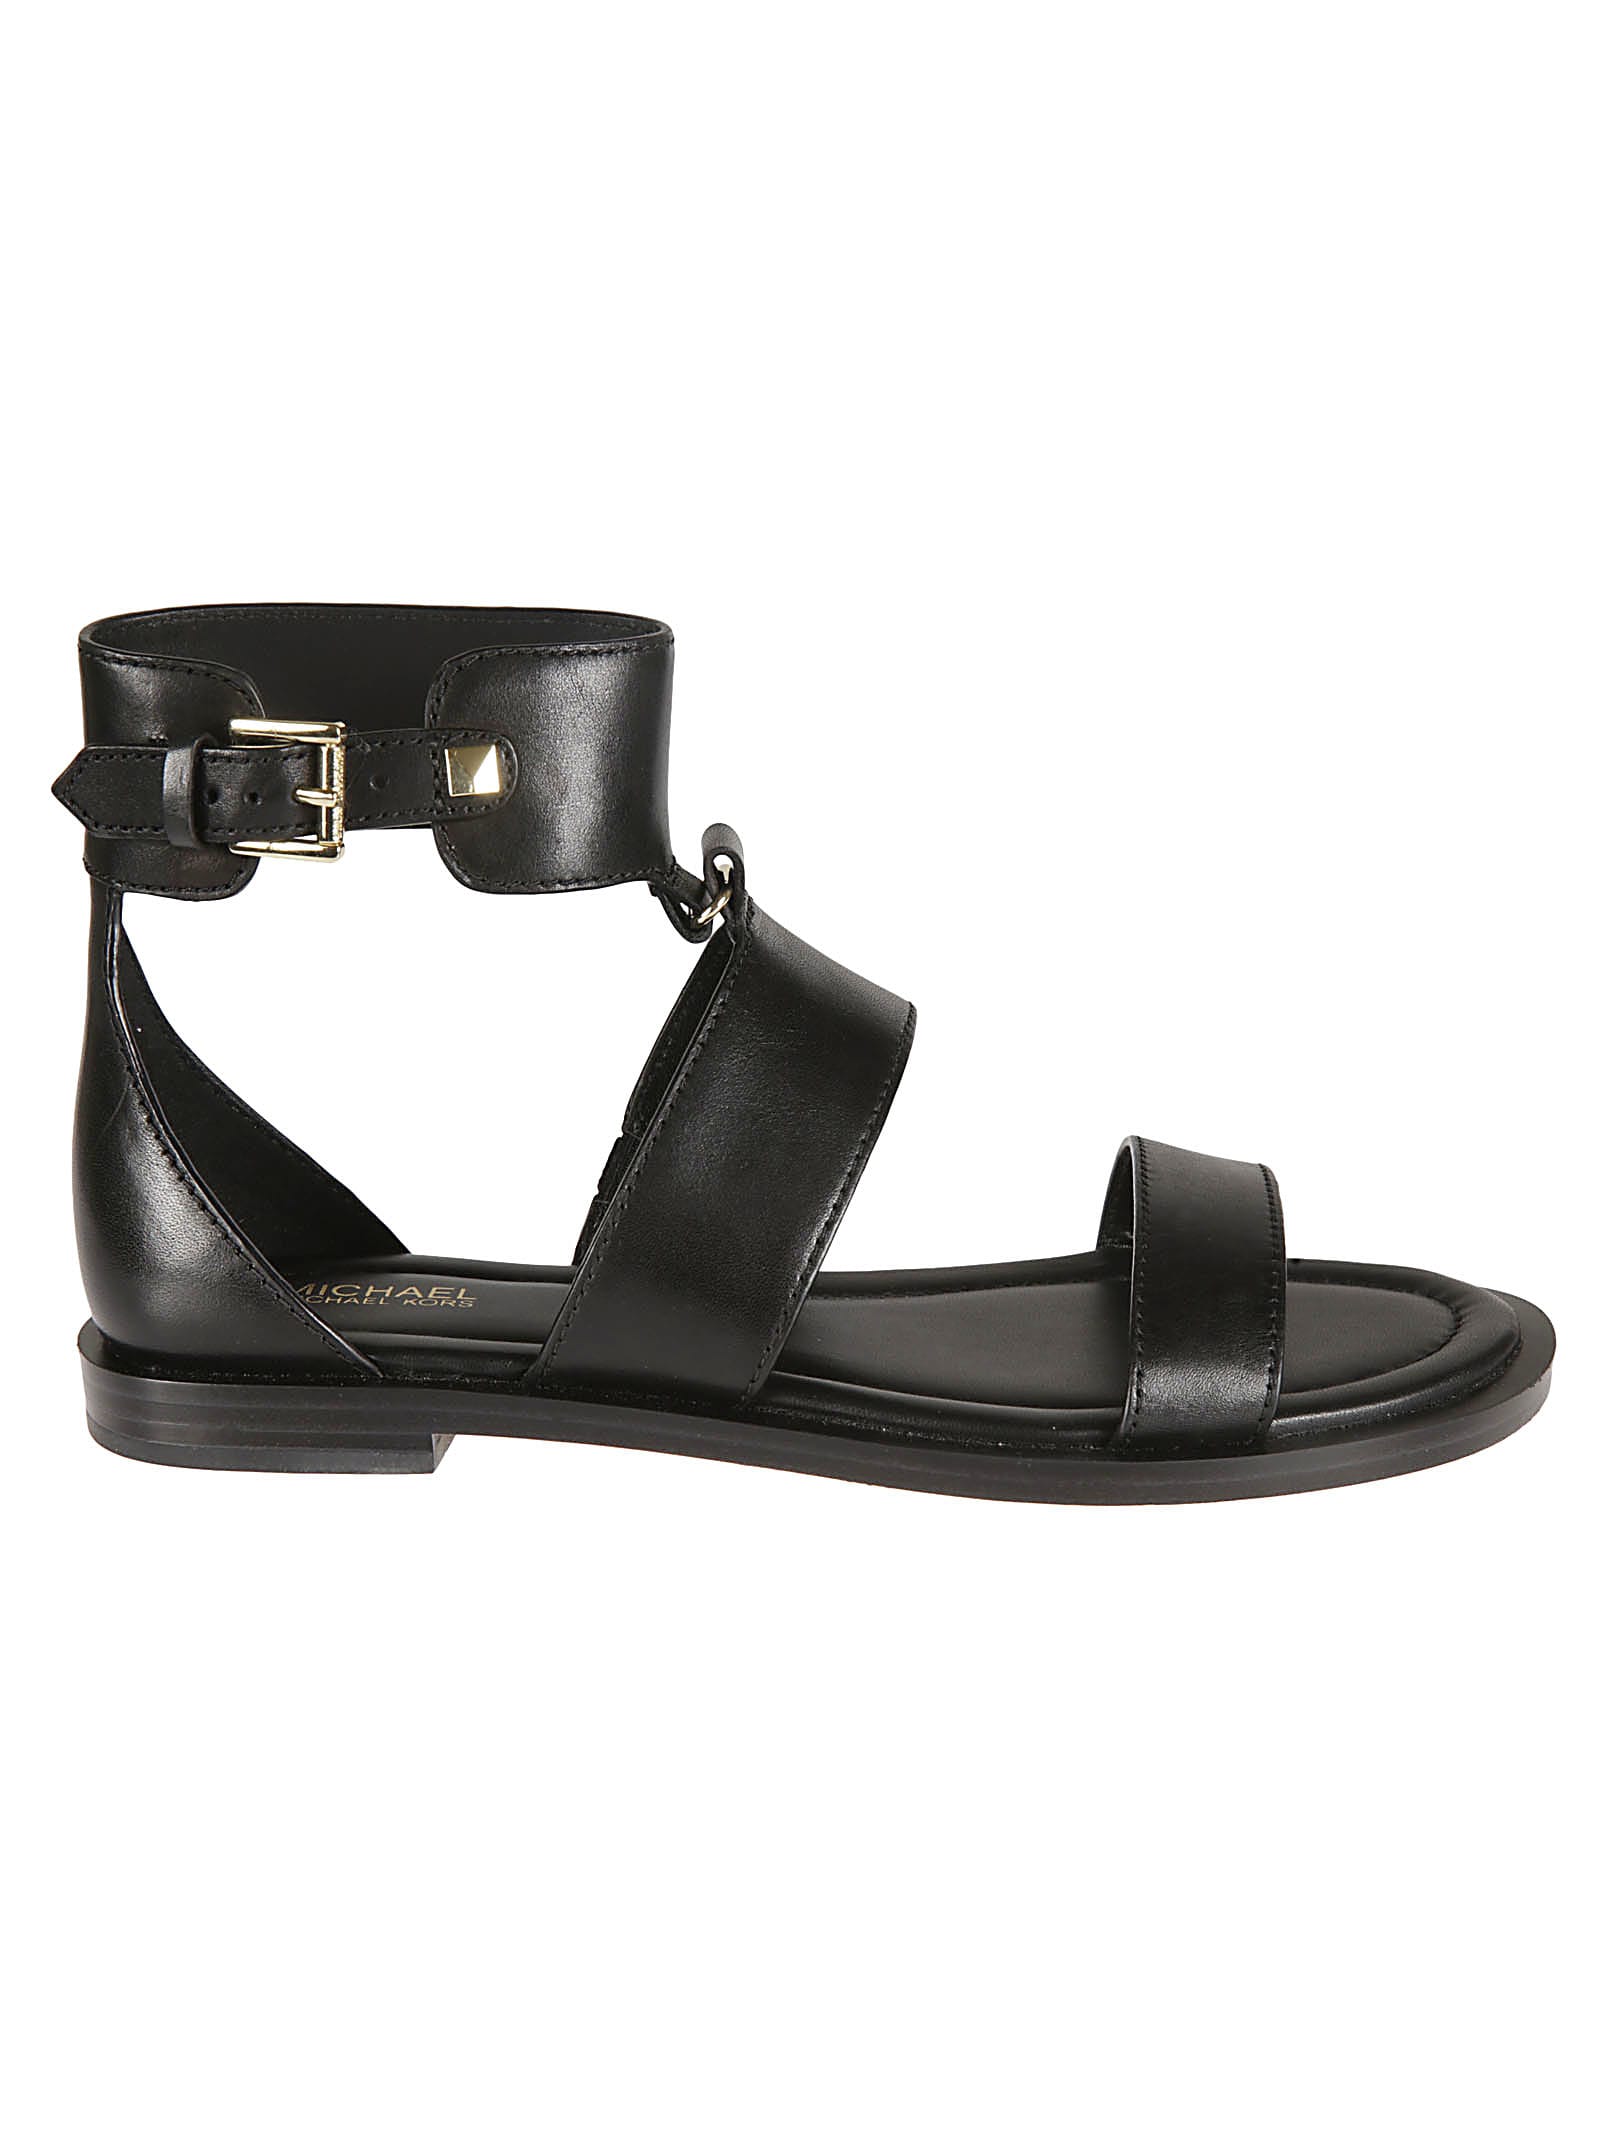 Buy Michael Kors Amos Flat Sandals online, shop Michael Kors shoes with free shipping